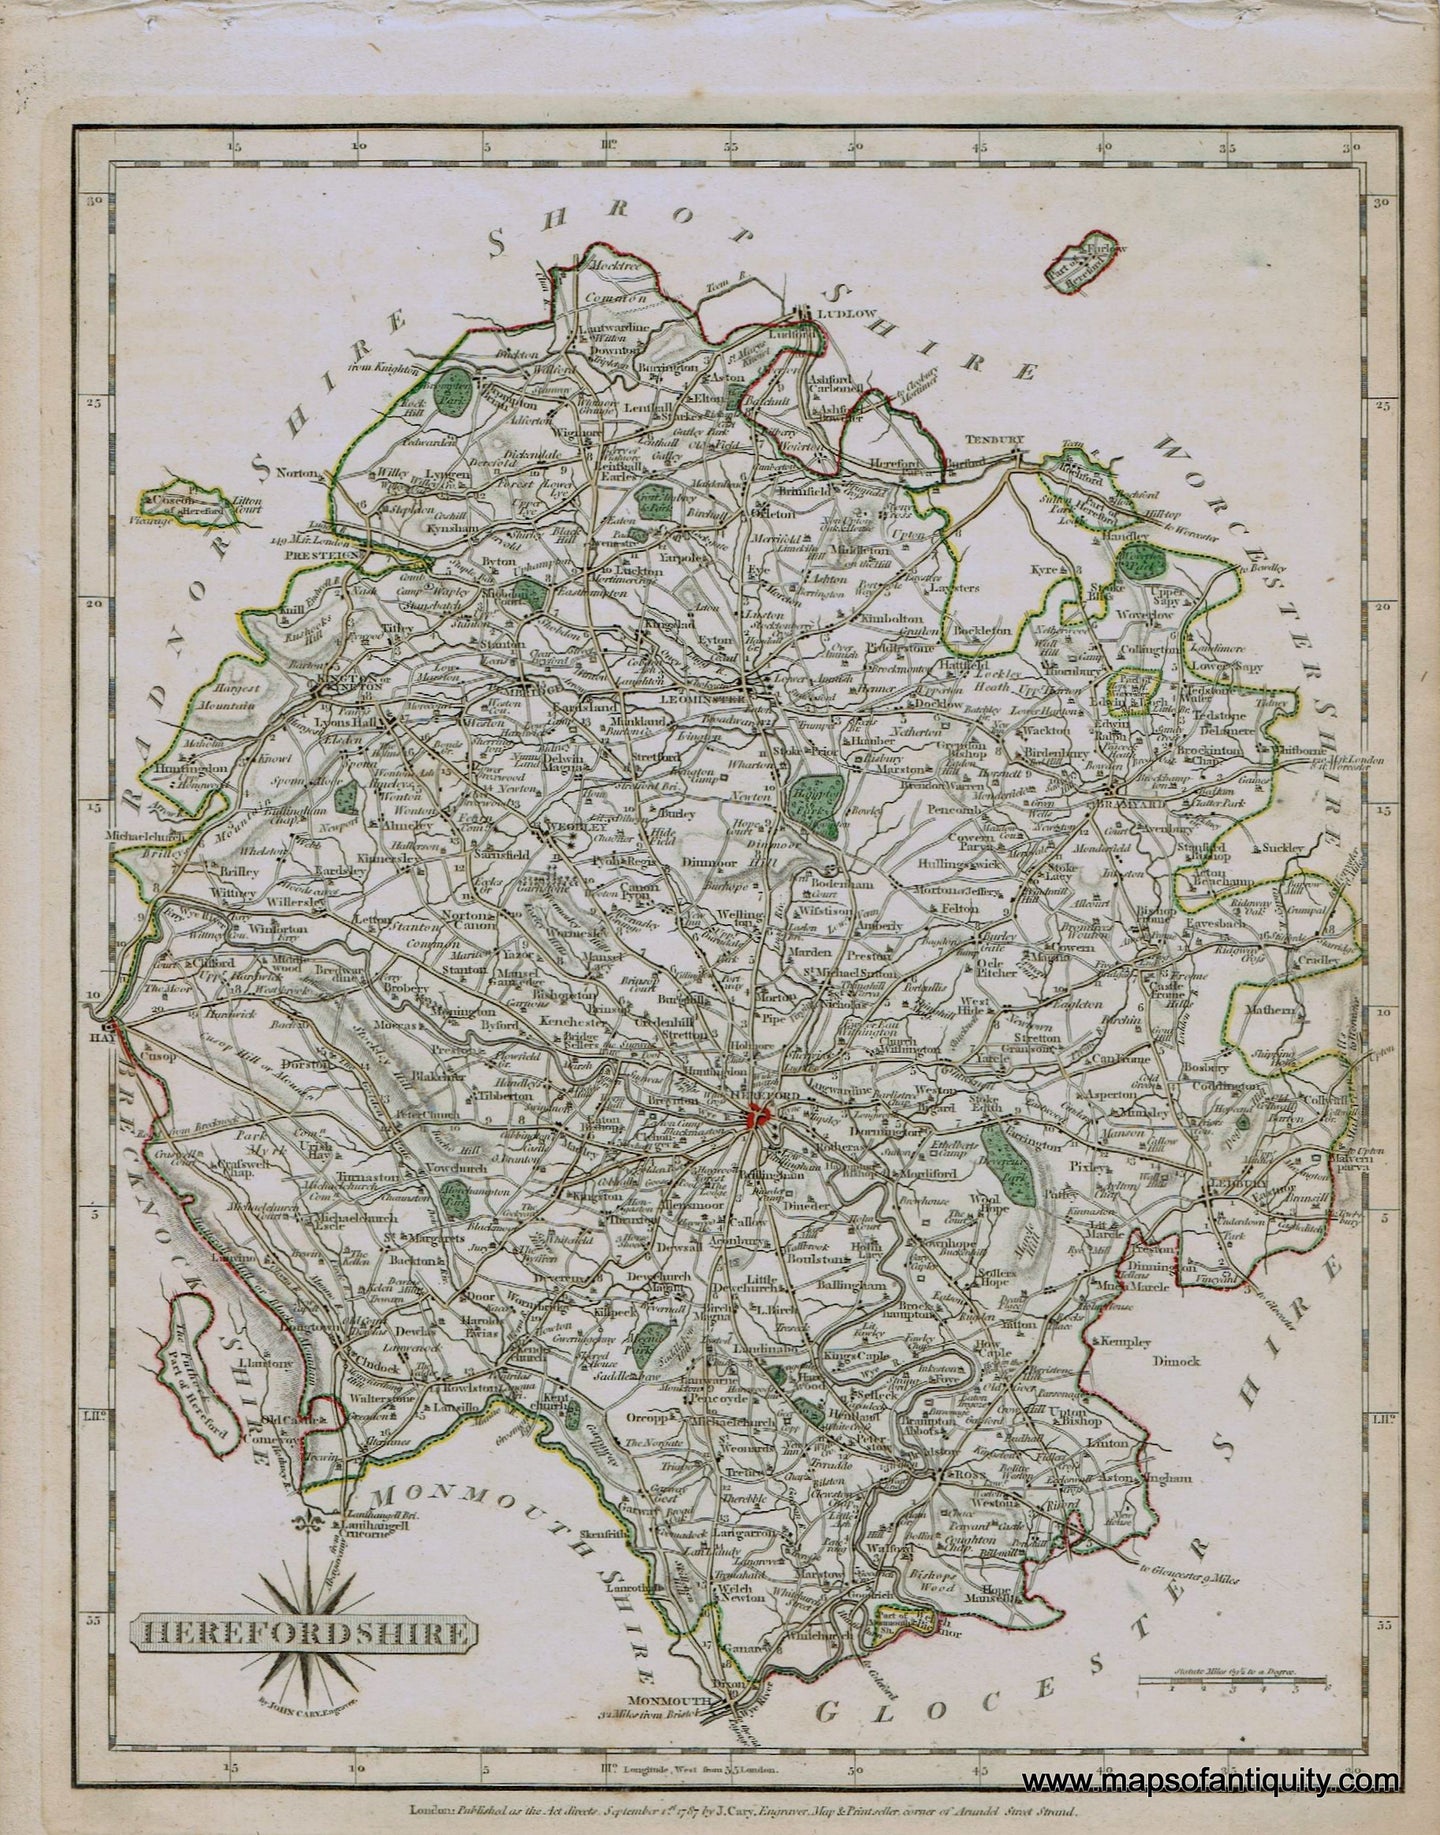 Antique-Hand-Colored-Map-Herefordshire-1787-John-Cary-England--1700s-18th-century-Maps-of-Antiquity